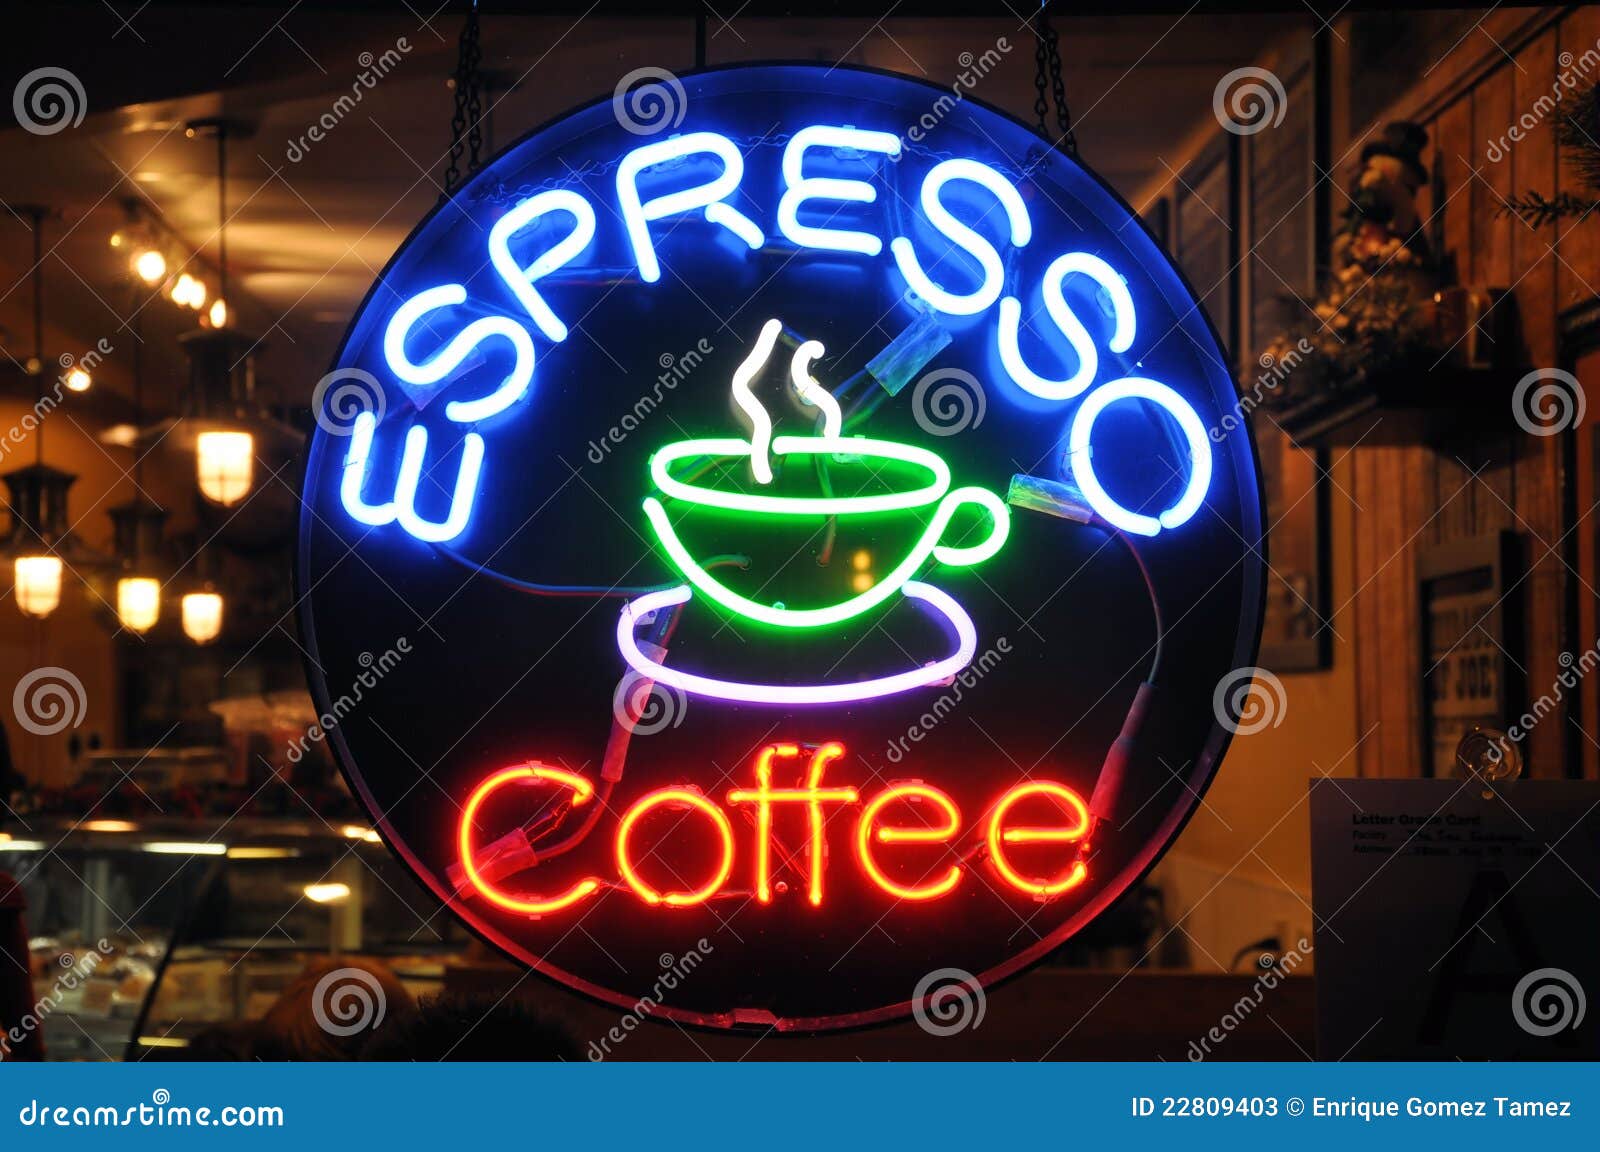 Neon Cafe sign stock image. Image of shop, cafe, coffe - 22809403